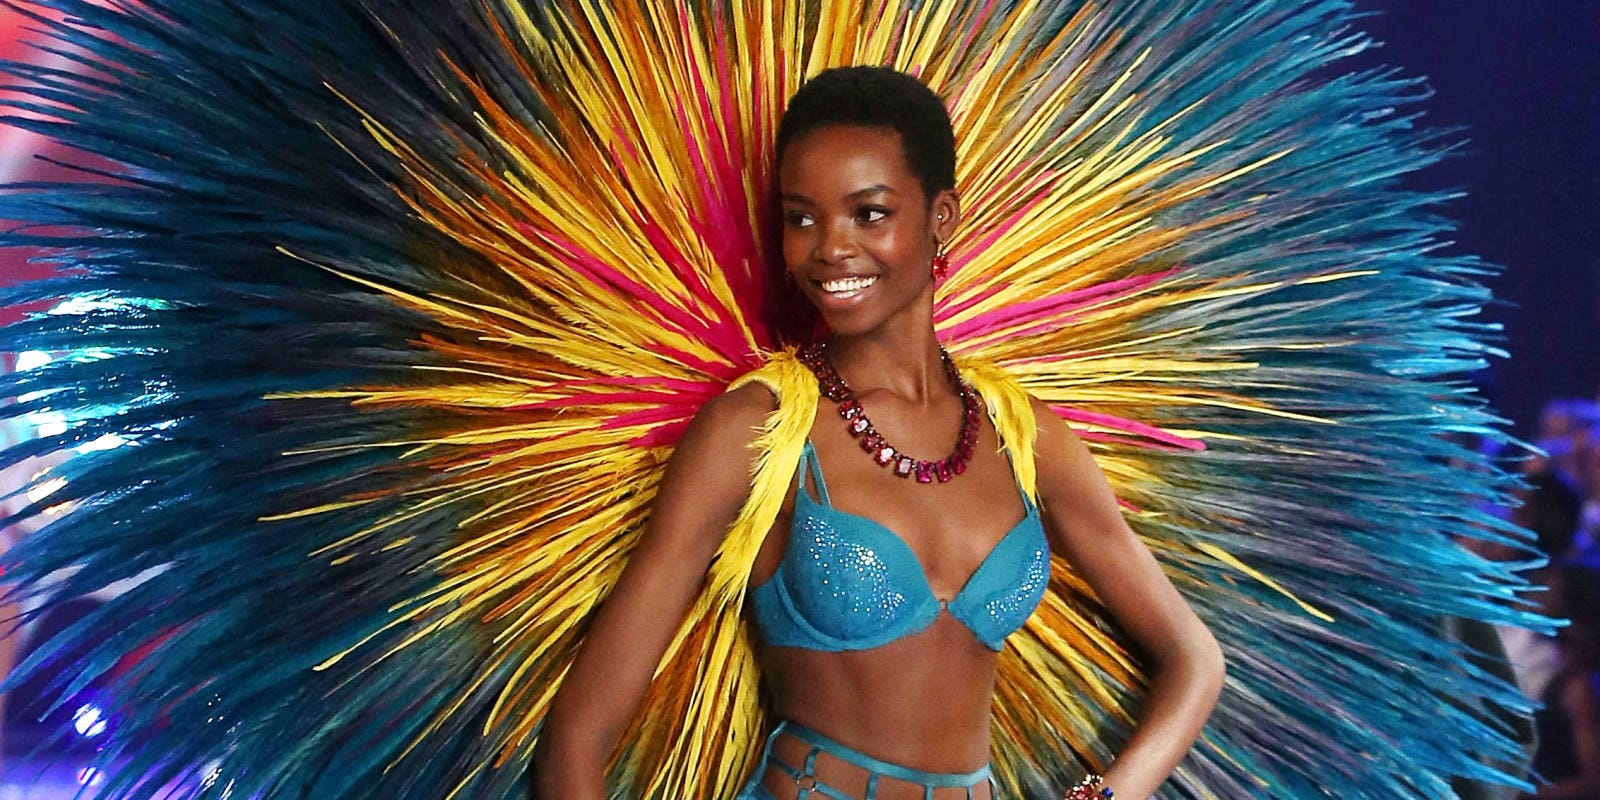 An Open Letter To The 2016 Victoria's Secret Fashion Show